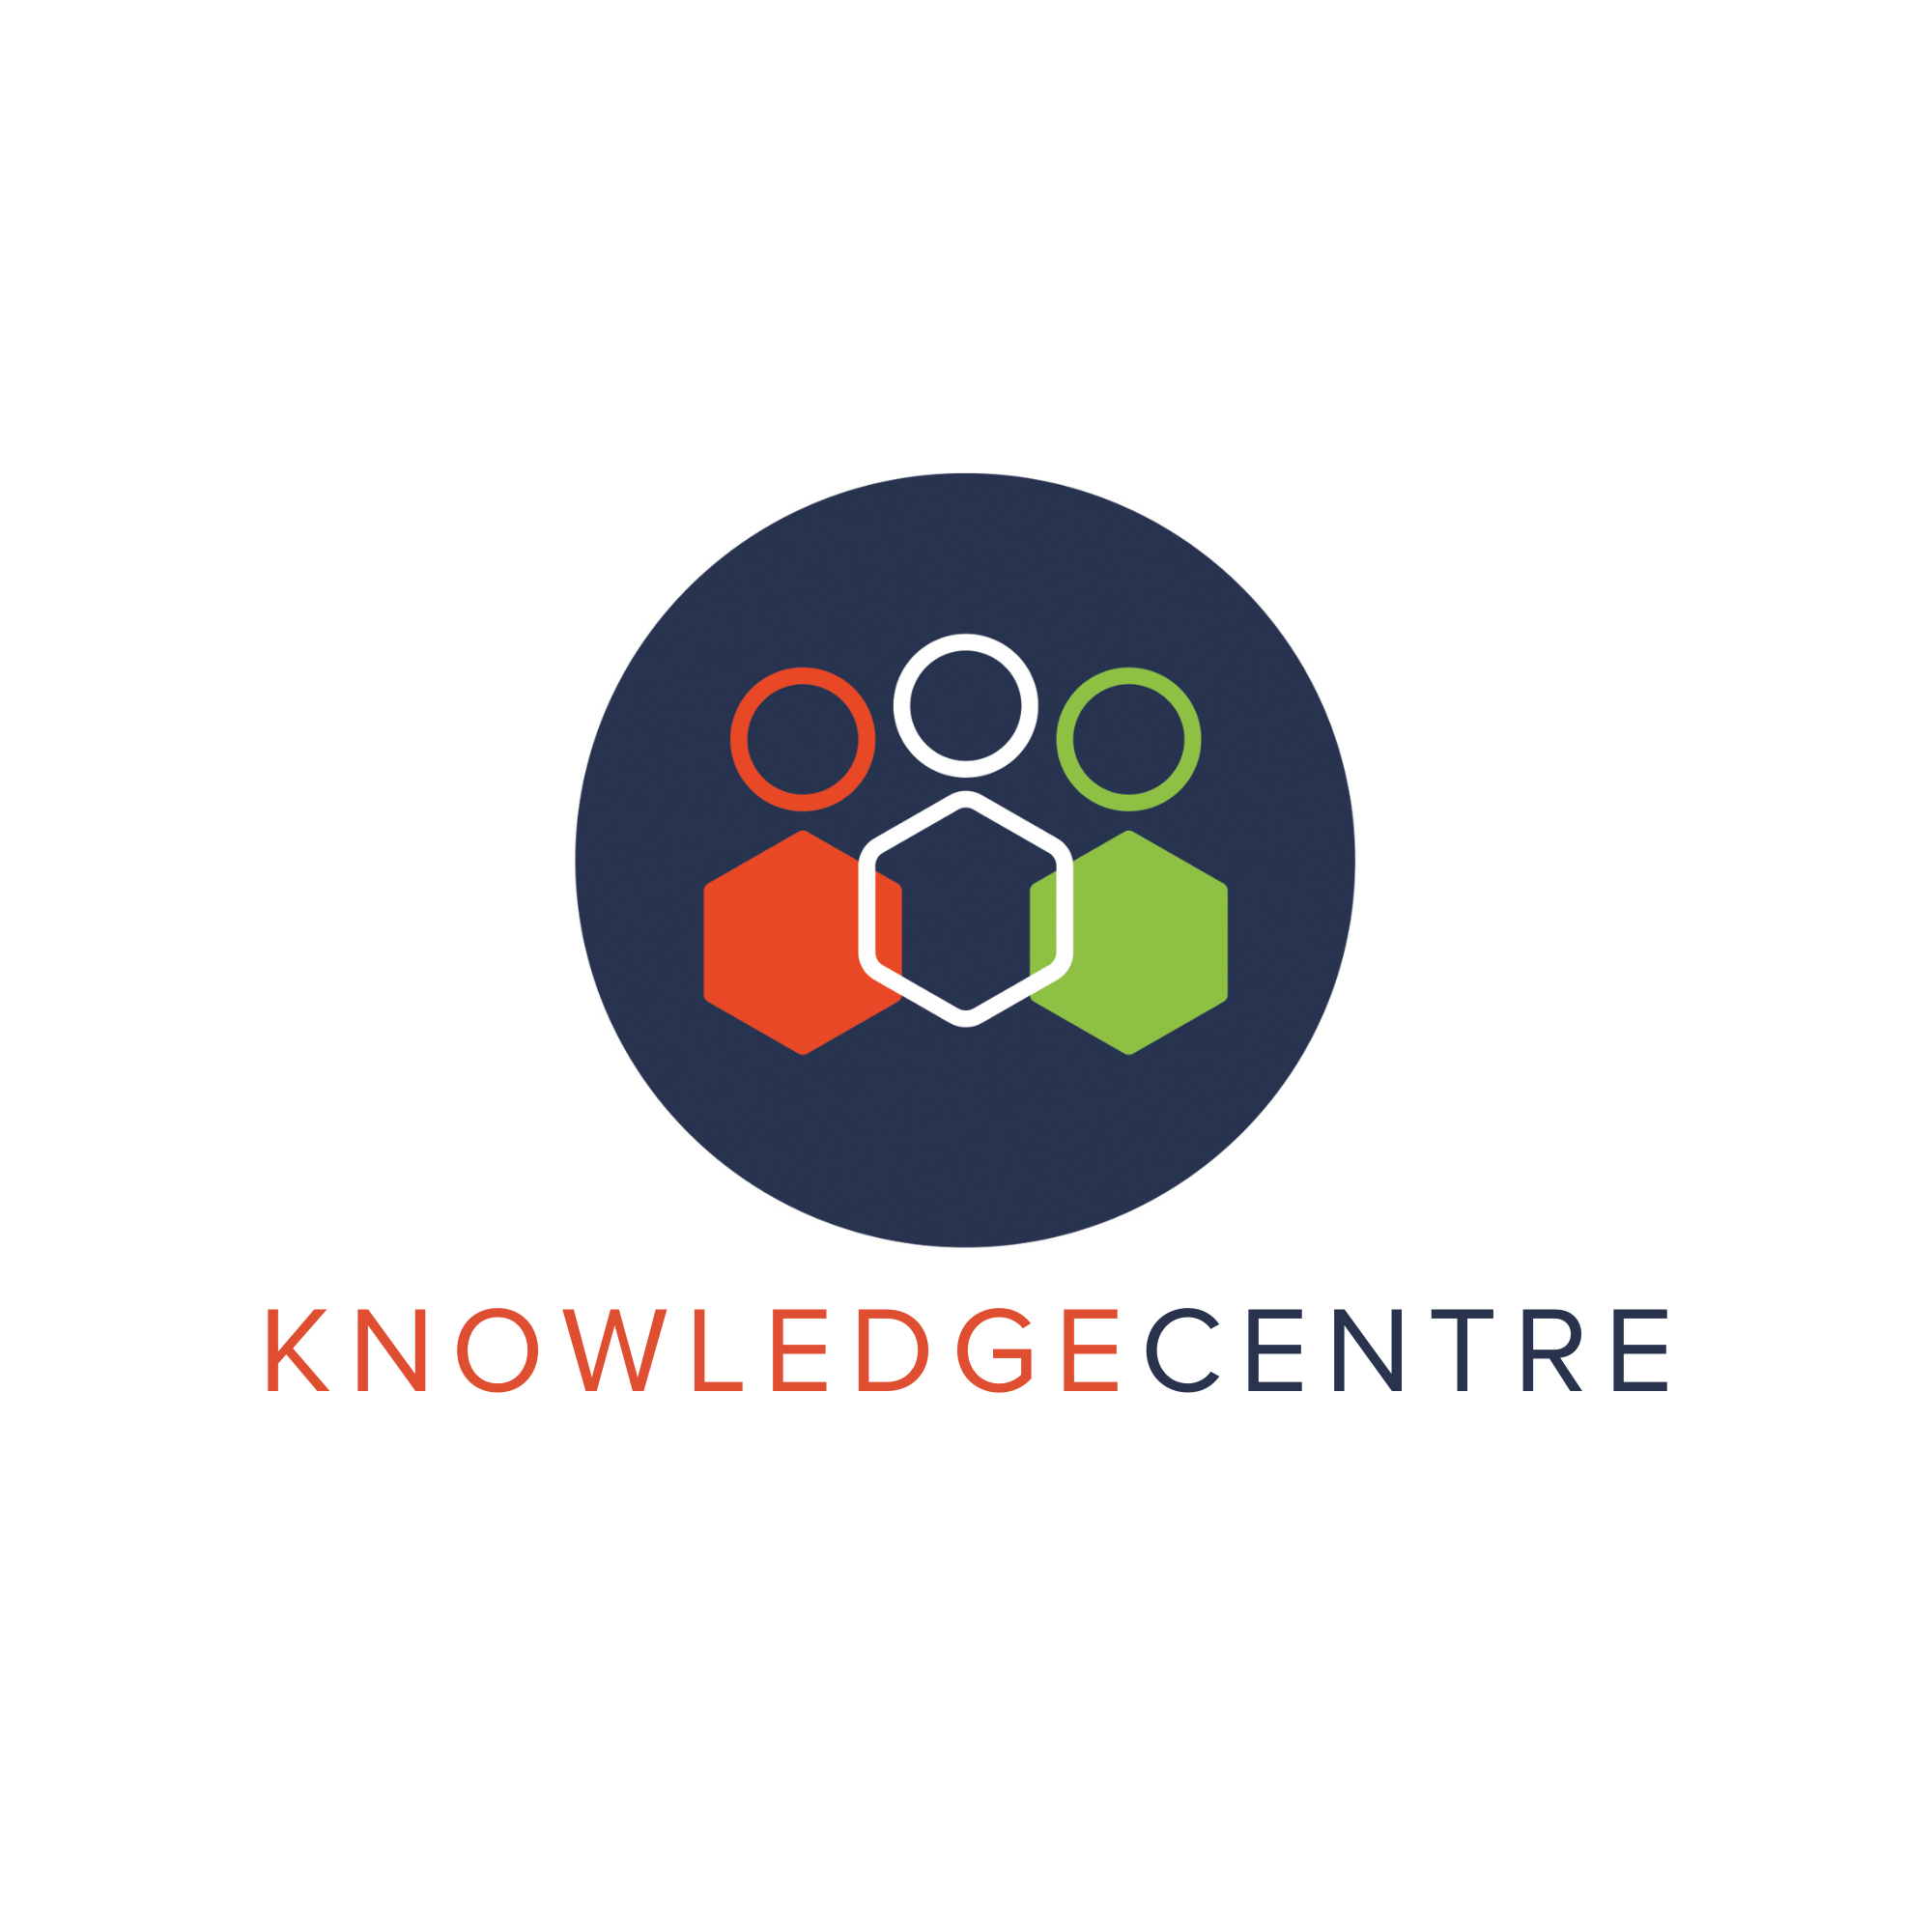 KNOWLEDGE CENTRE (5).png